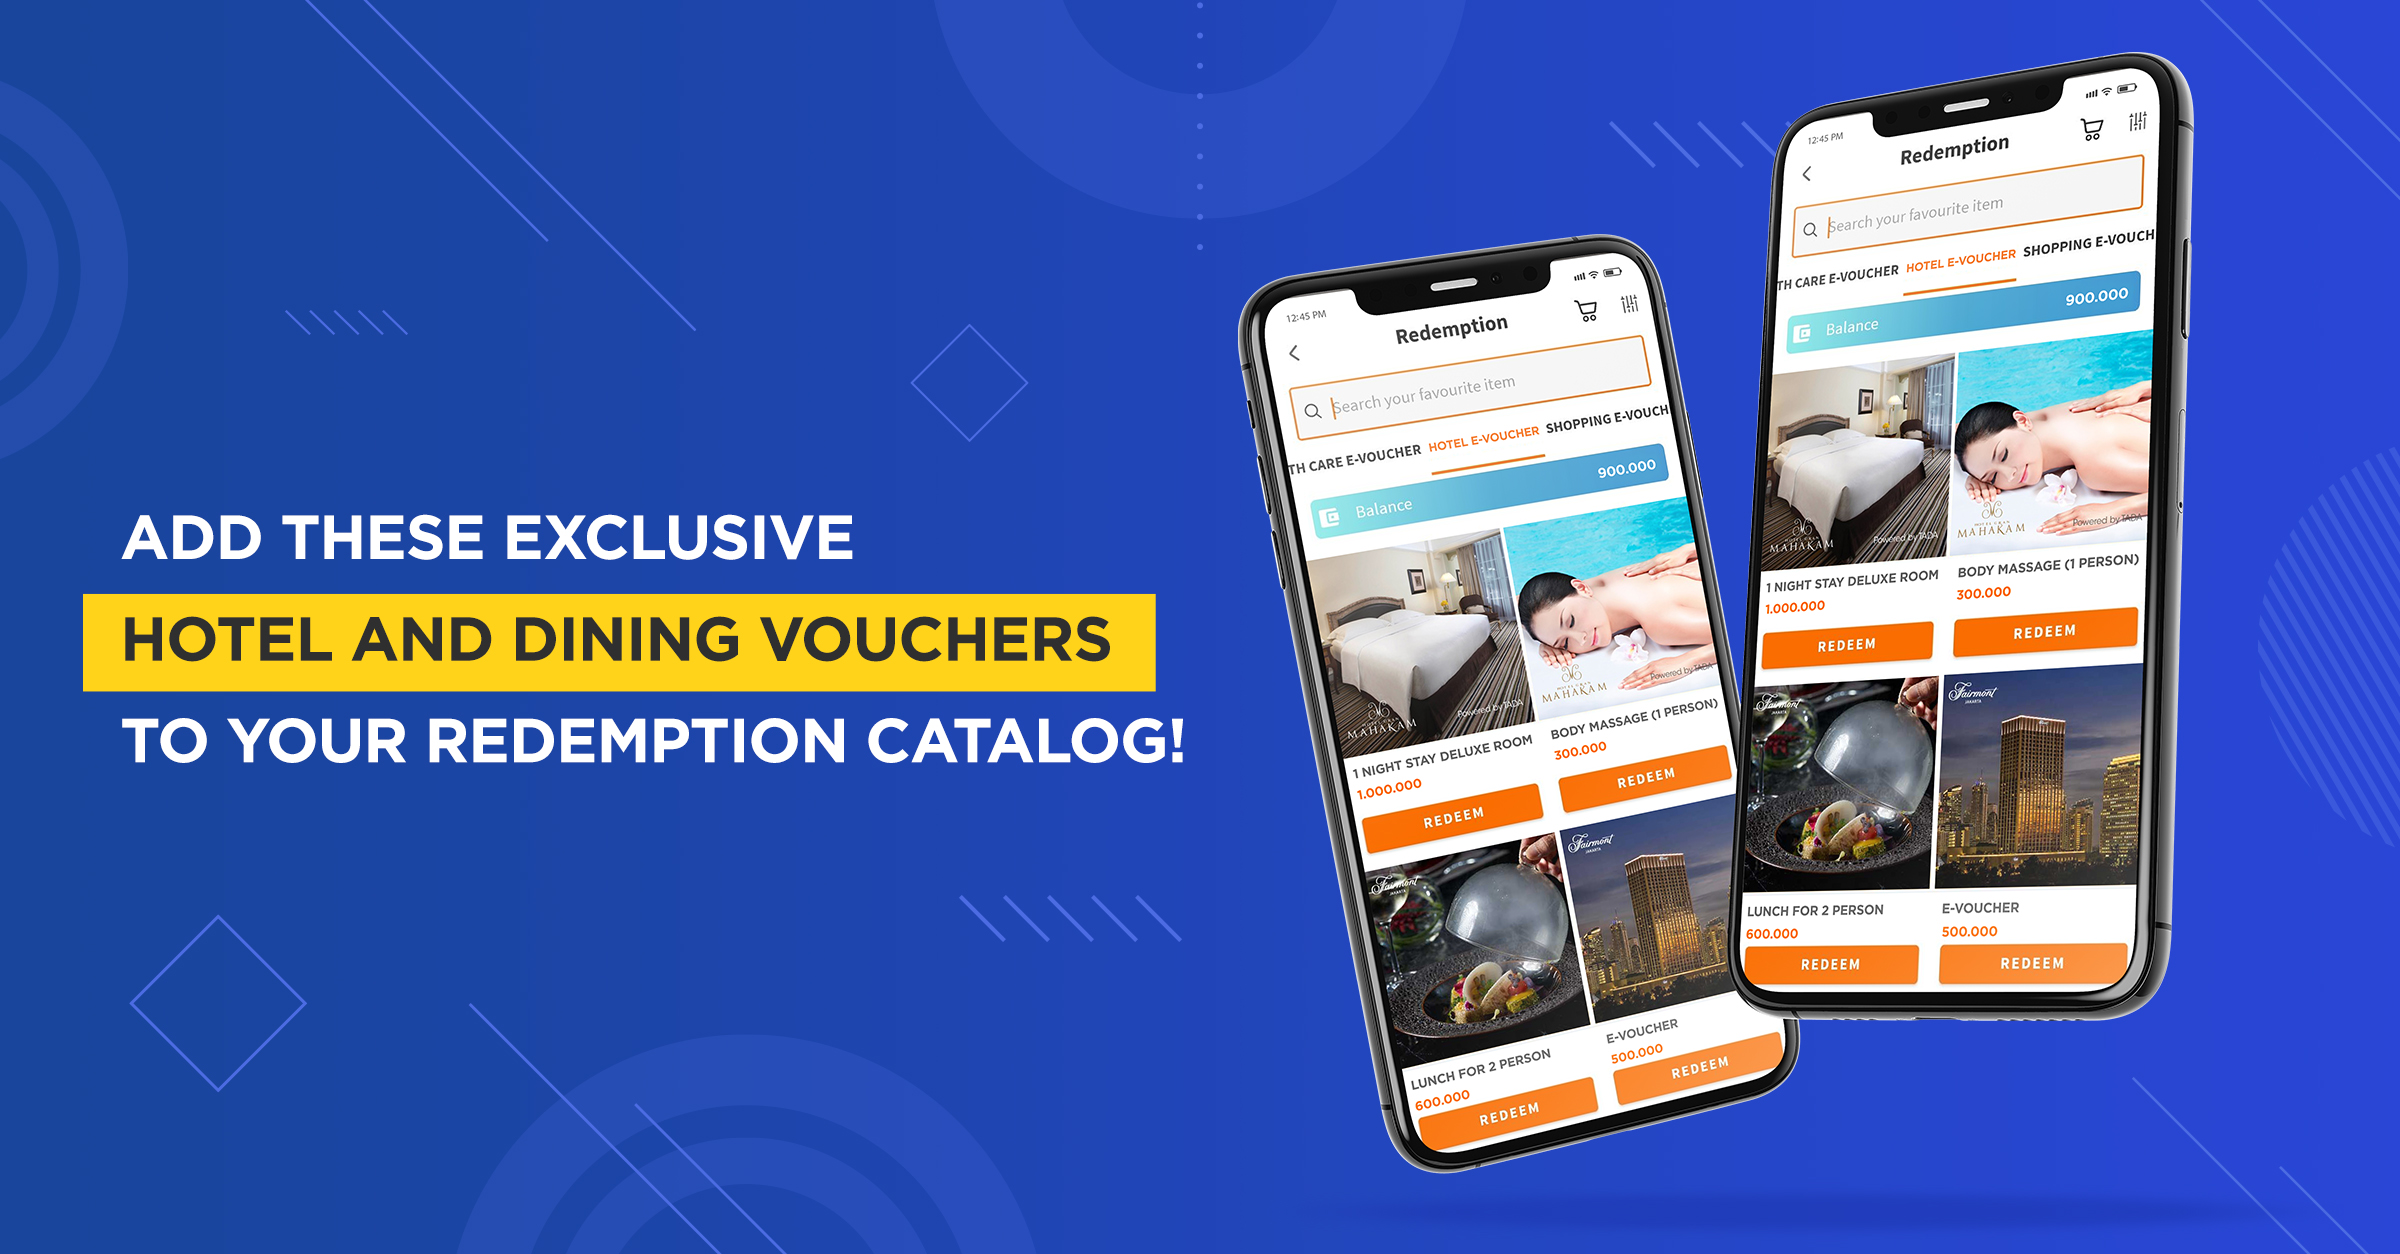 Add These Exclusive Hotel and Dining Vouchers to Your Redemption Catalog!